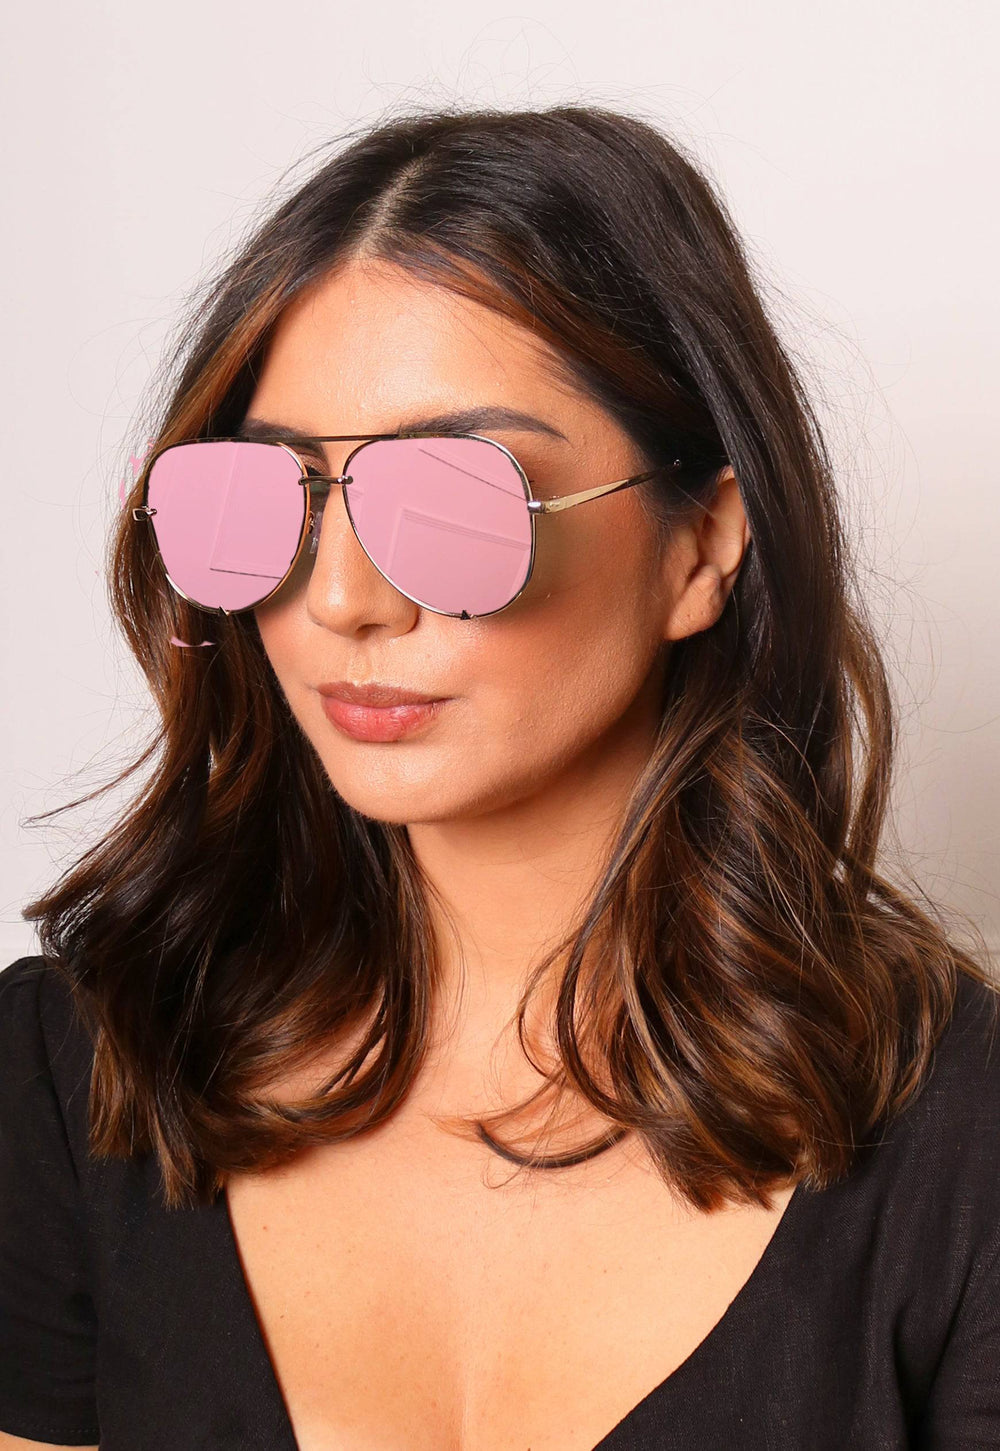 Gili Oversized Metal Frame Aviator Sunglasses in Pink Mirrored Lens with Gold Frame - One Nation Clothing